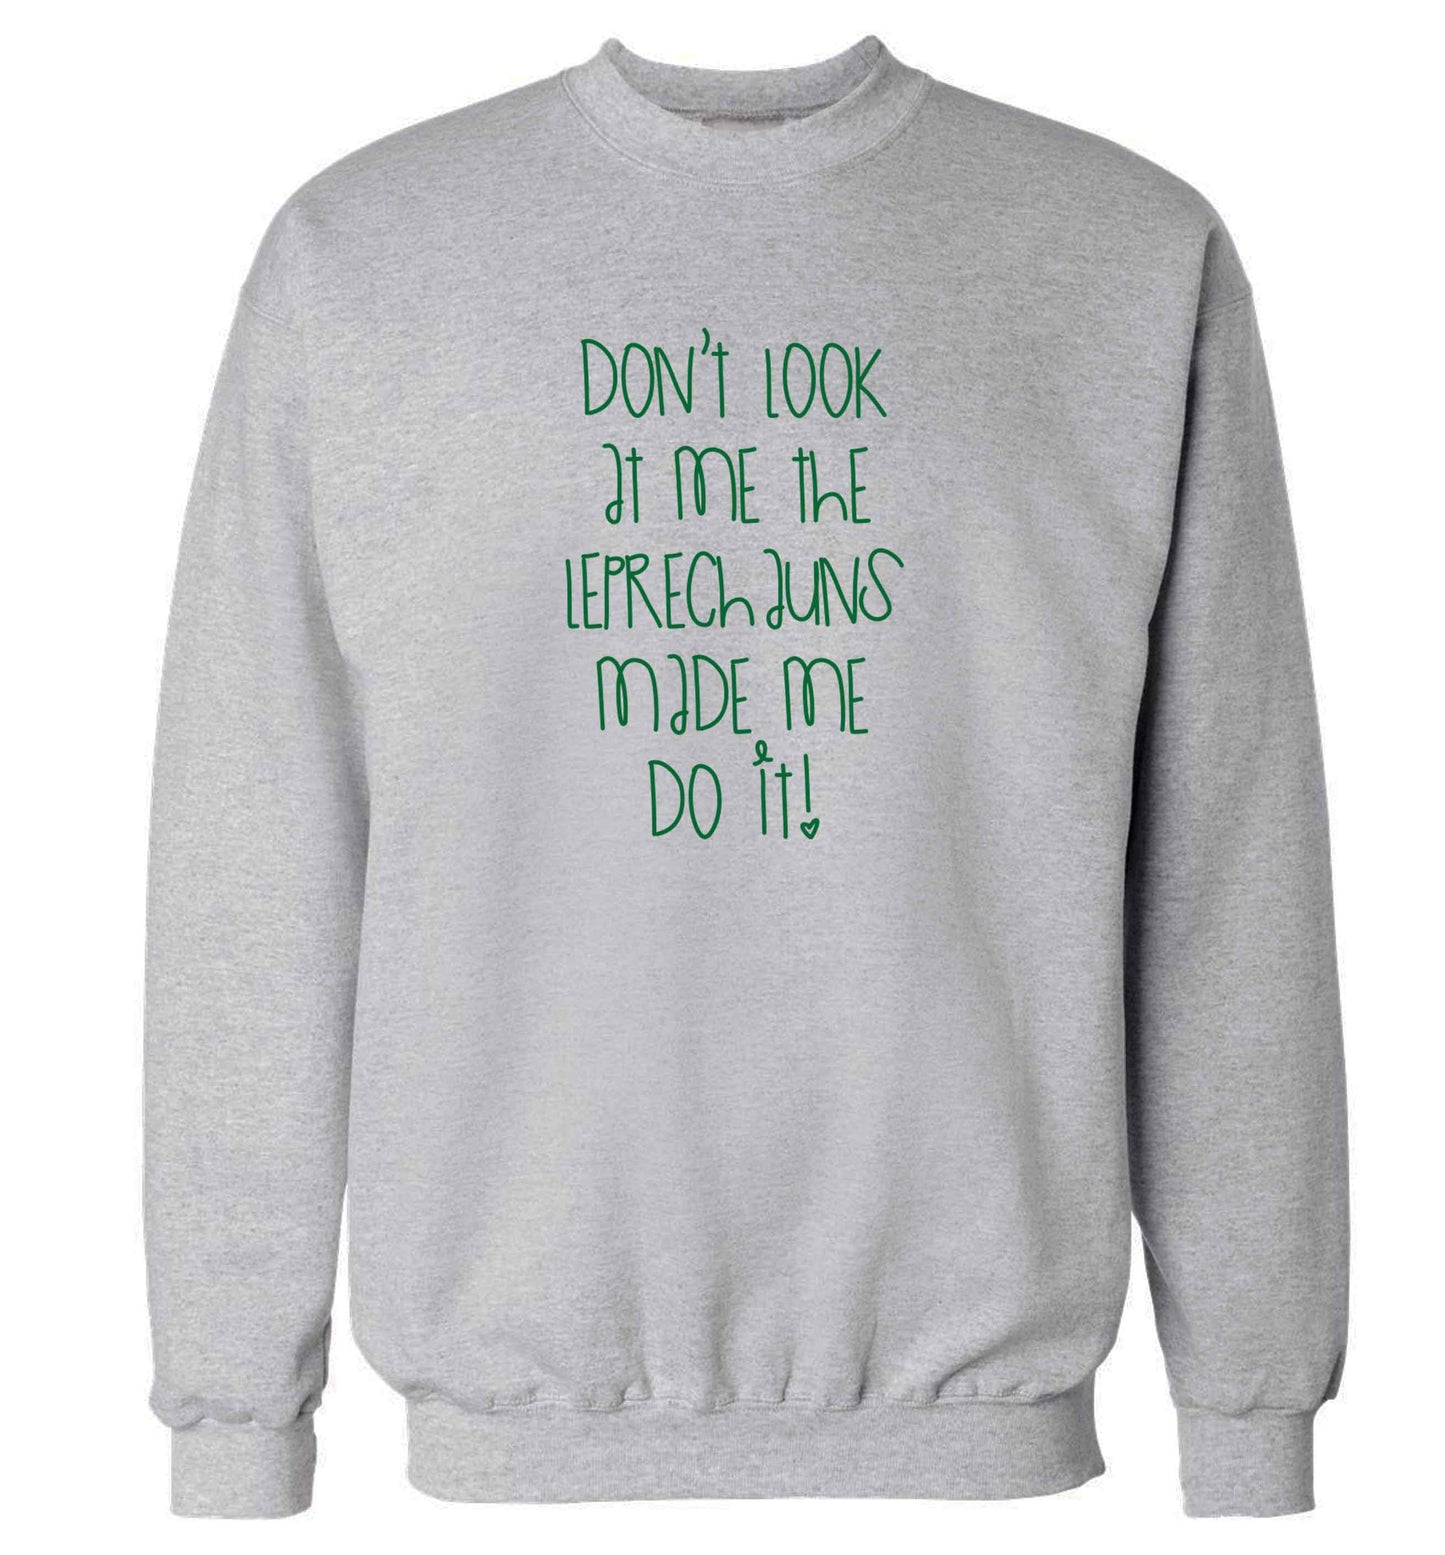 Don't look at me the leprechauns made me do it adult's unisex grey sweater 2XL